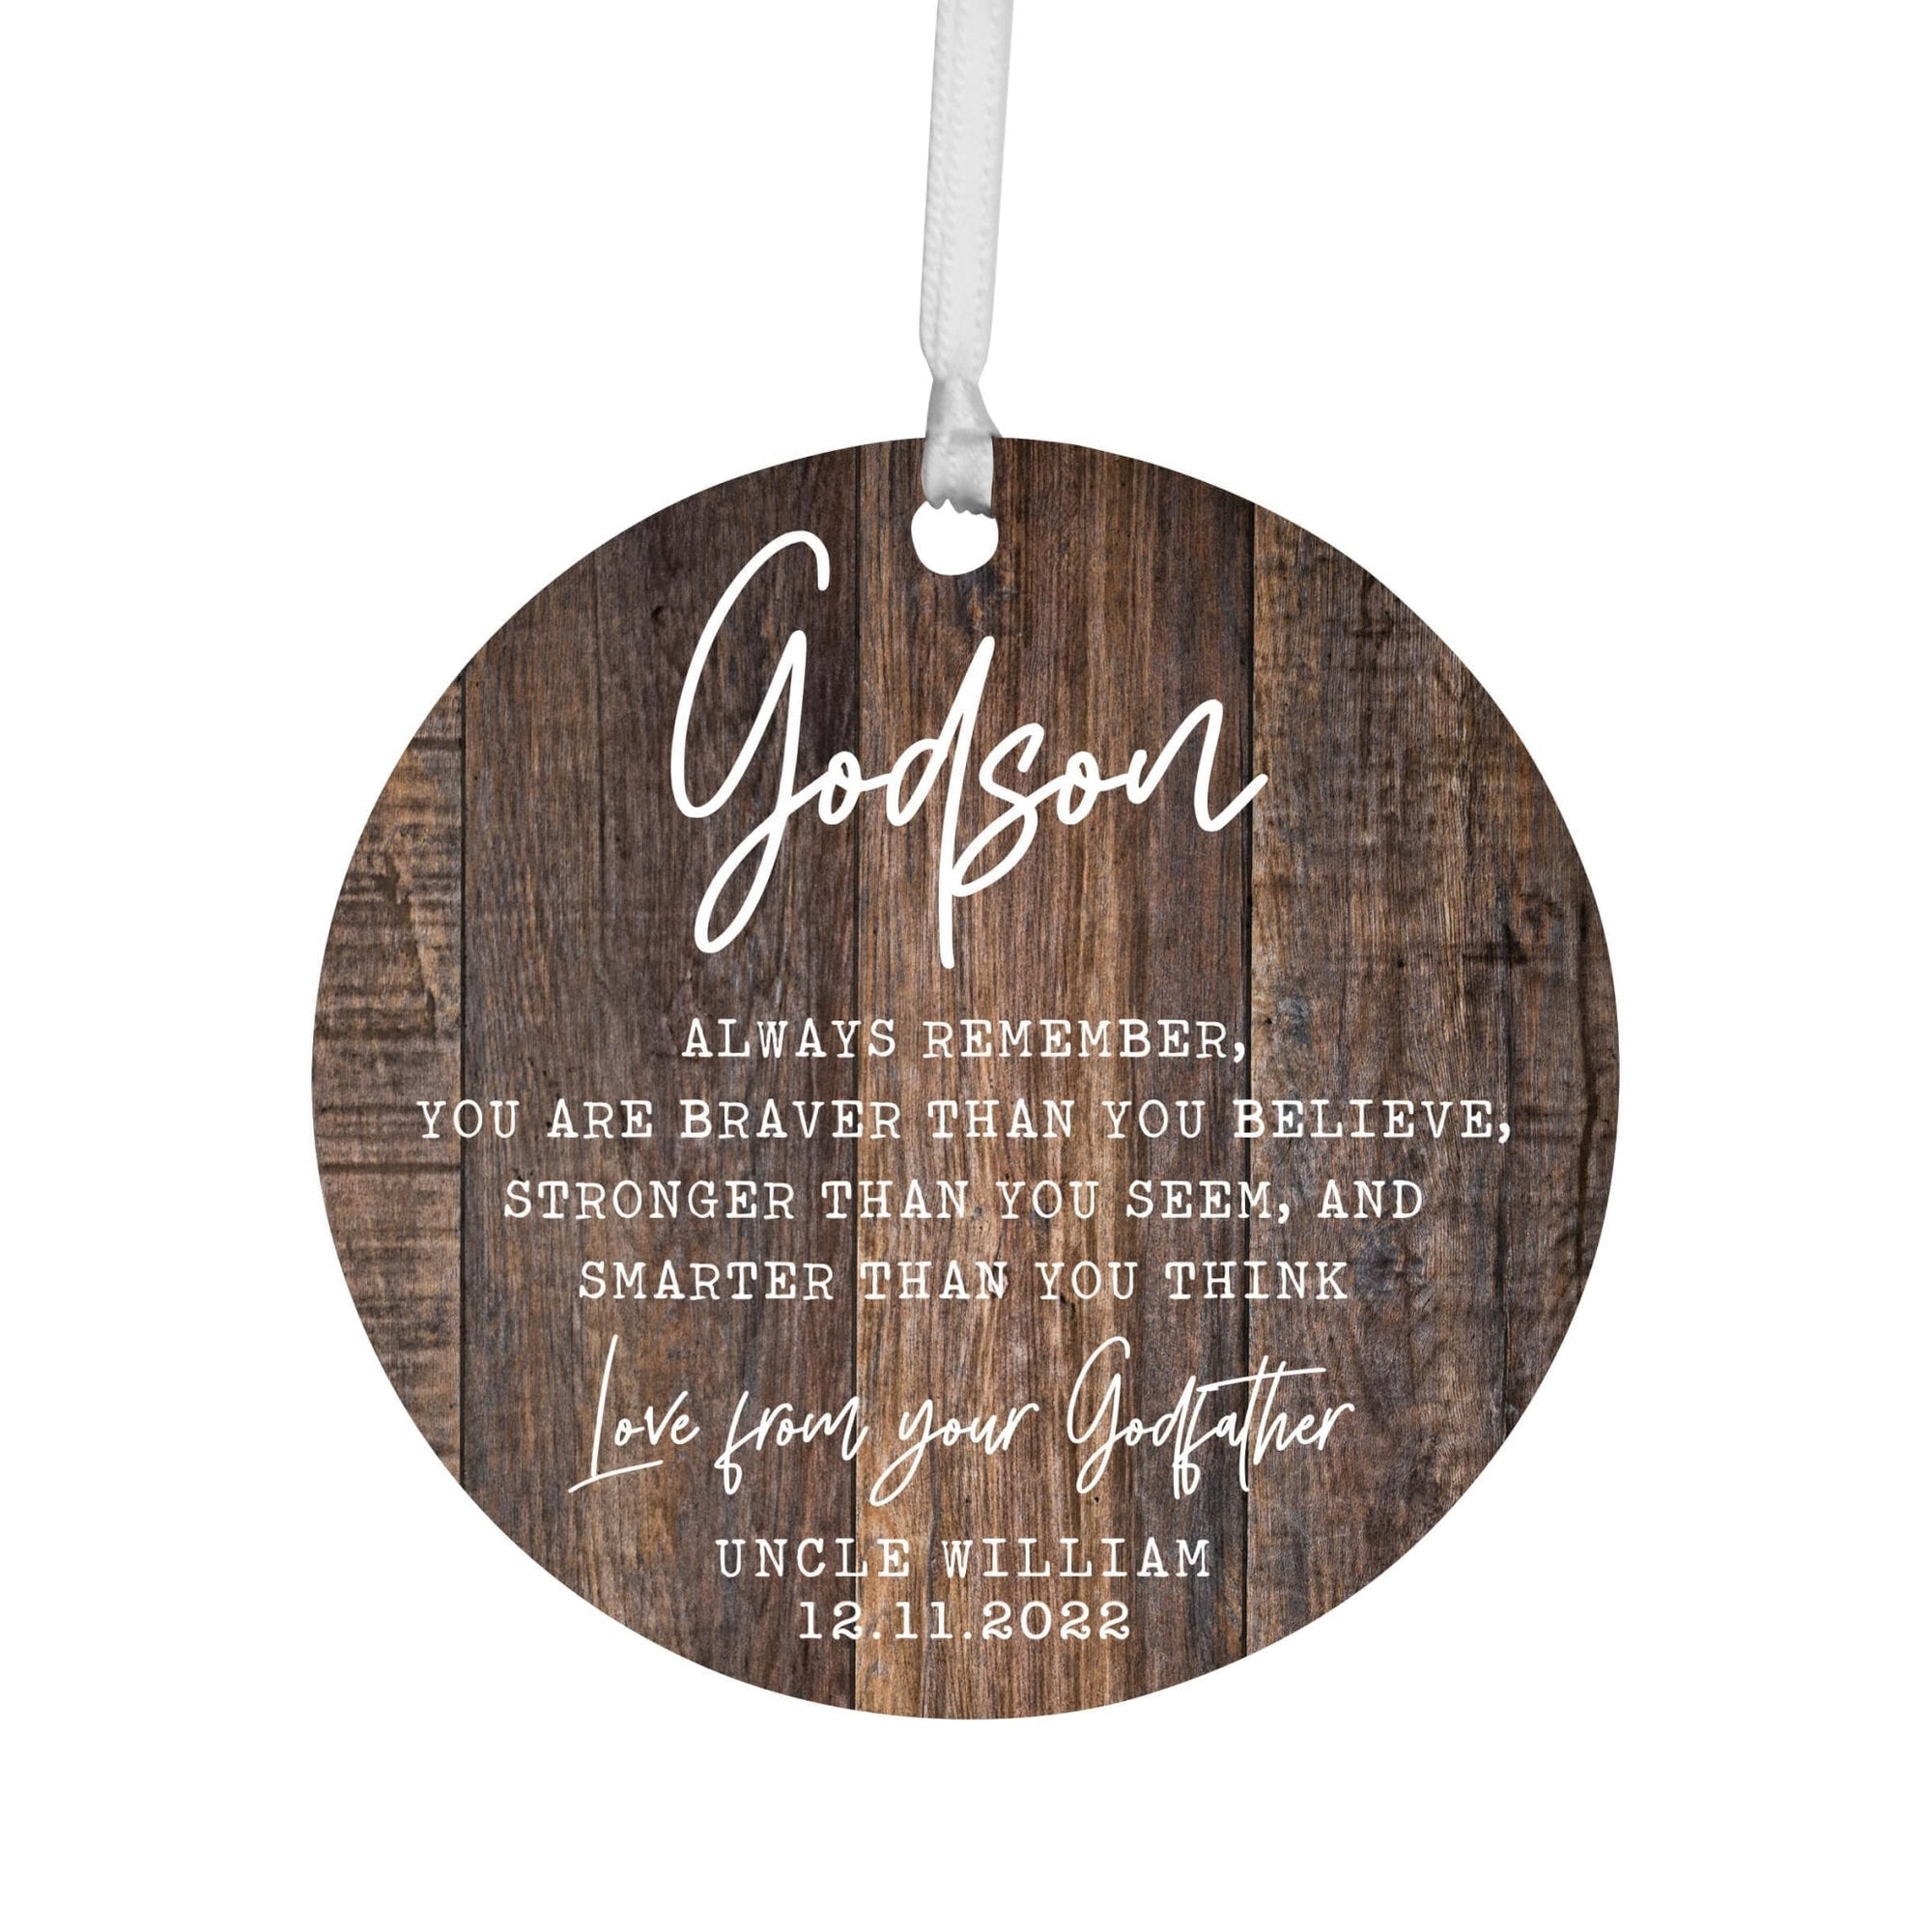 Personalized Unique Wooden Baptism Ornament Gift for Godson - Always Remember You Are Braver - LifeSong Milestones